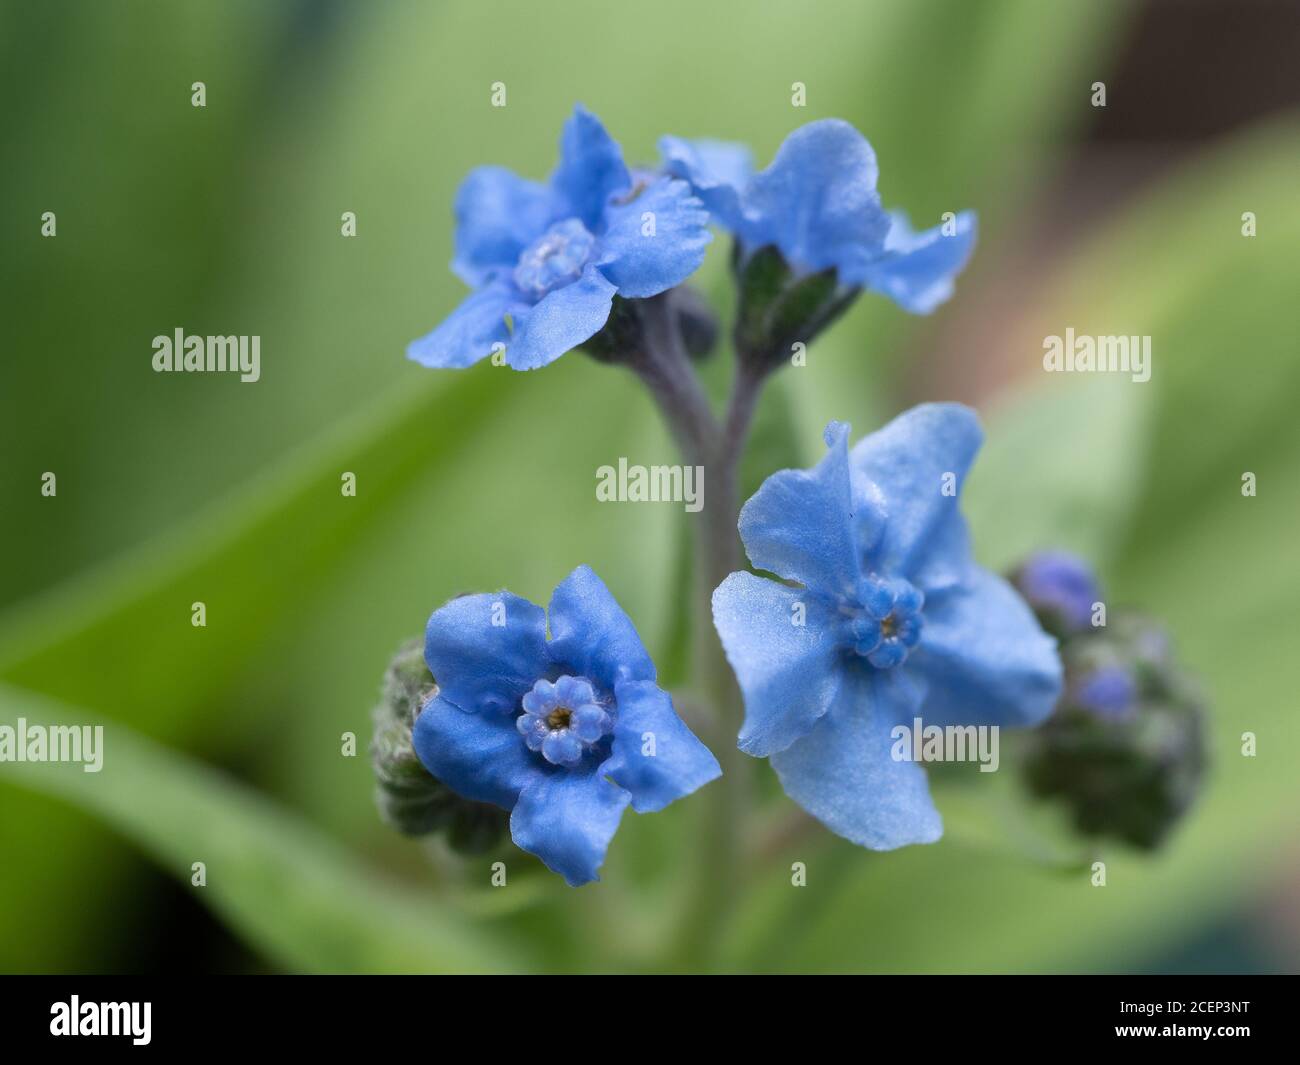 Chinese Forget-me-not, tiny  blue flowers, up close in an Australian coastal garden, blurred green background Stock Photo